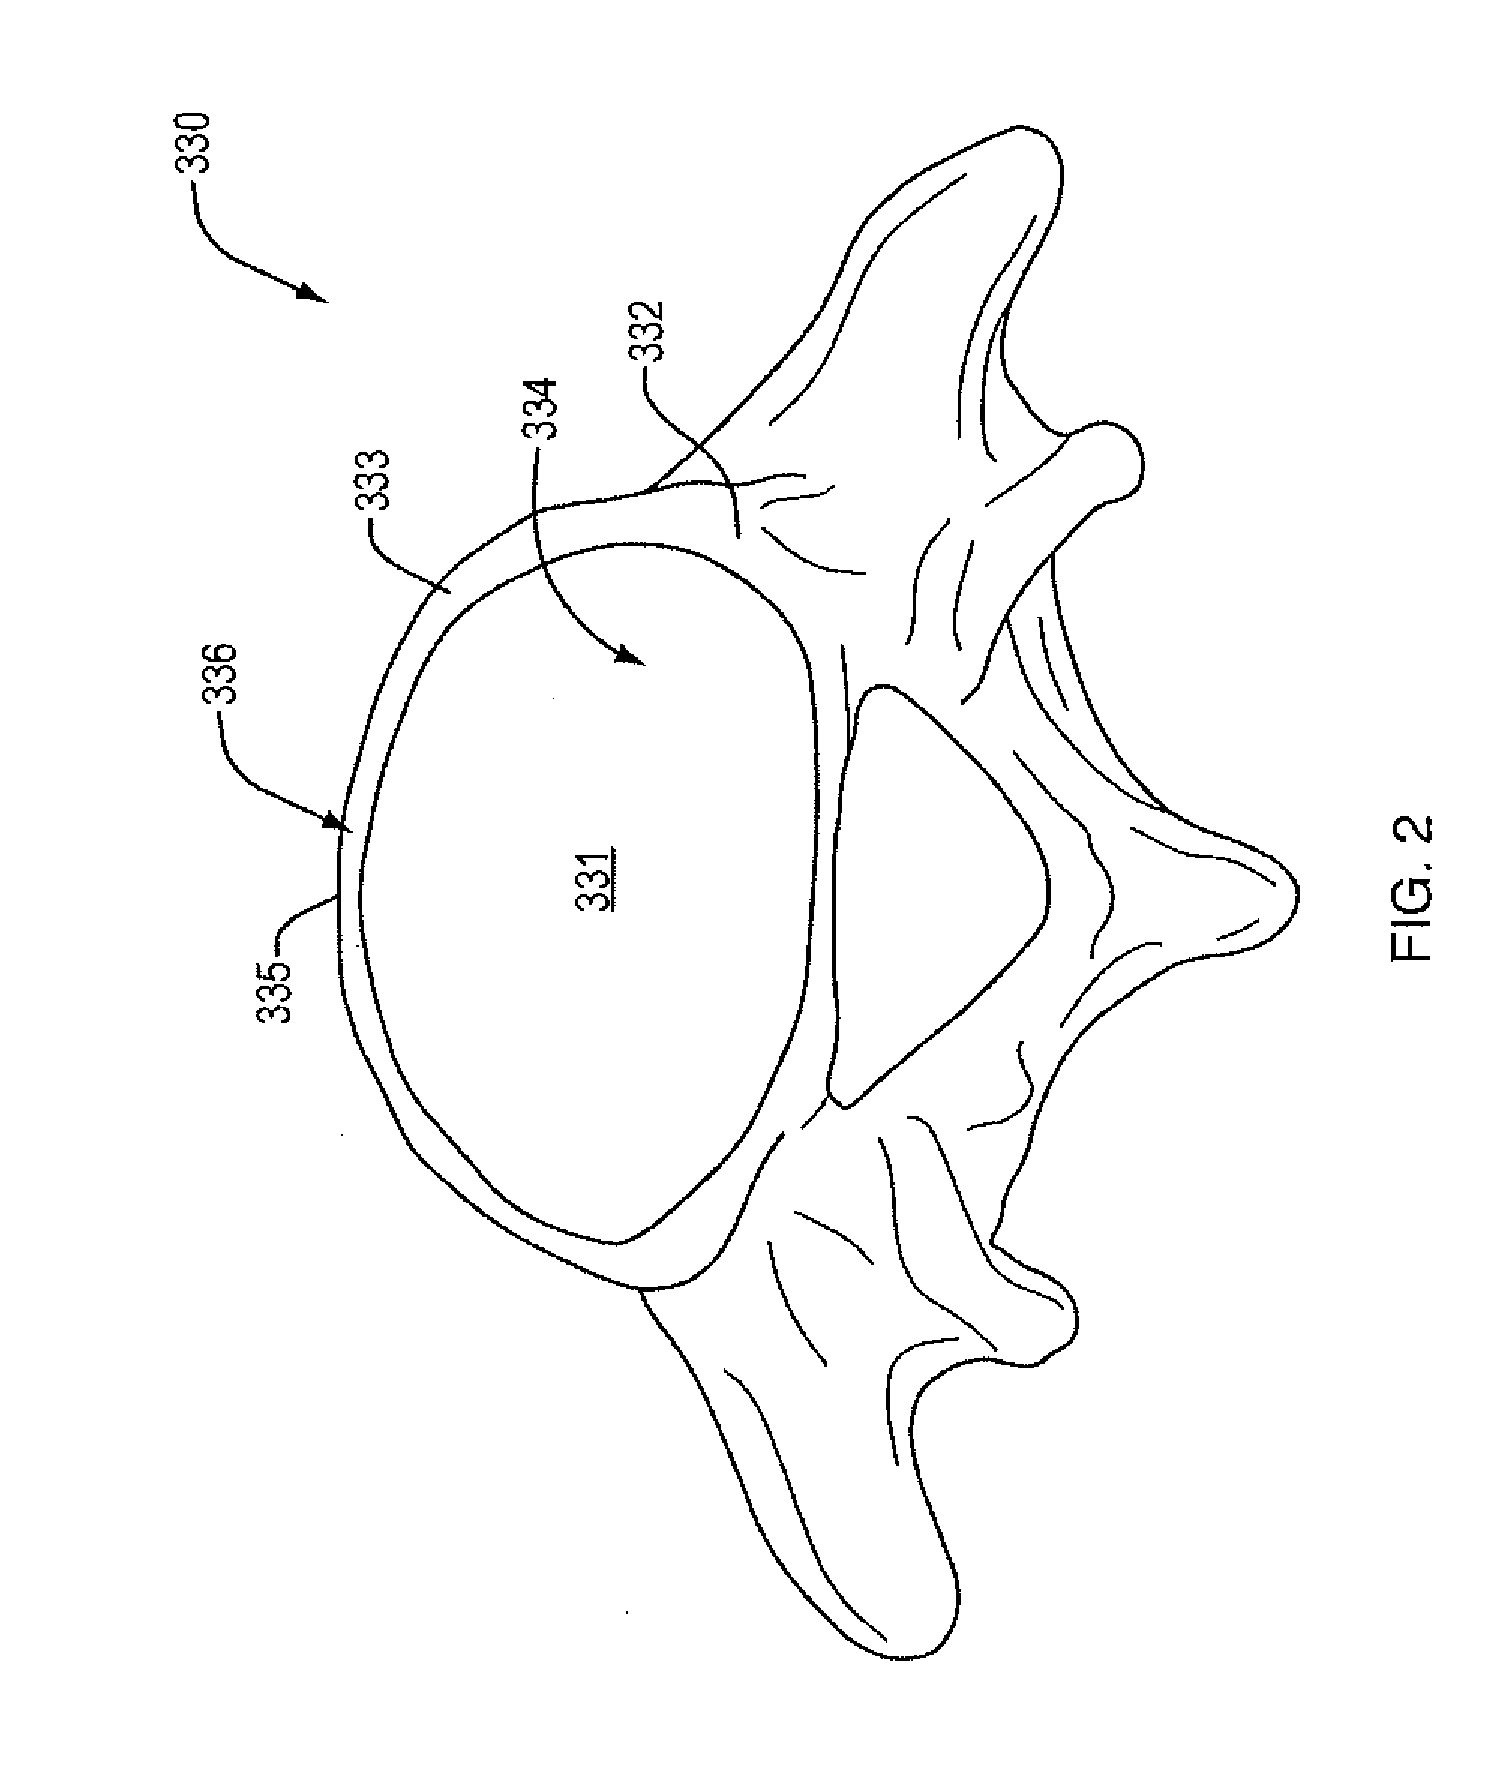 Expandable spinal implant apparatus and method of use